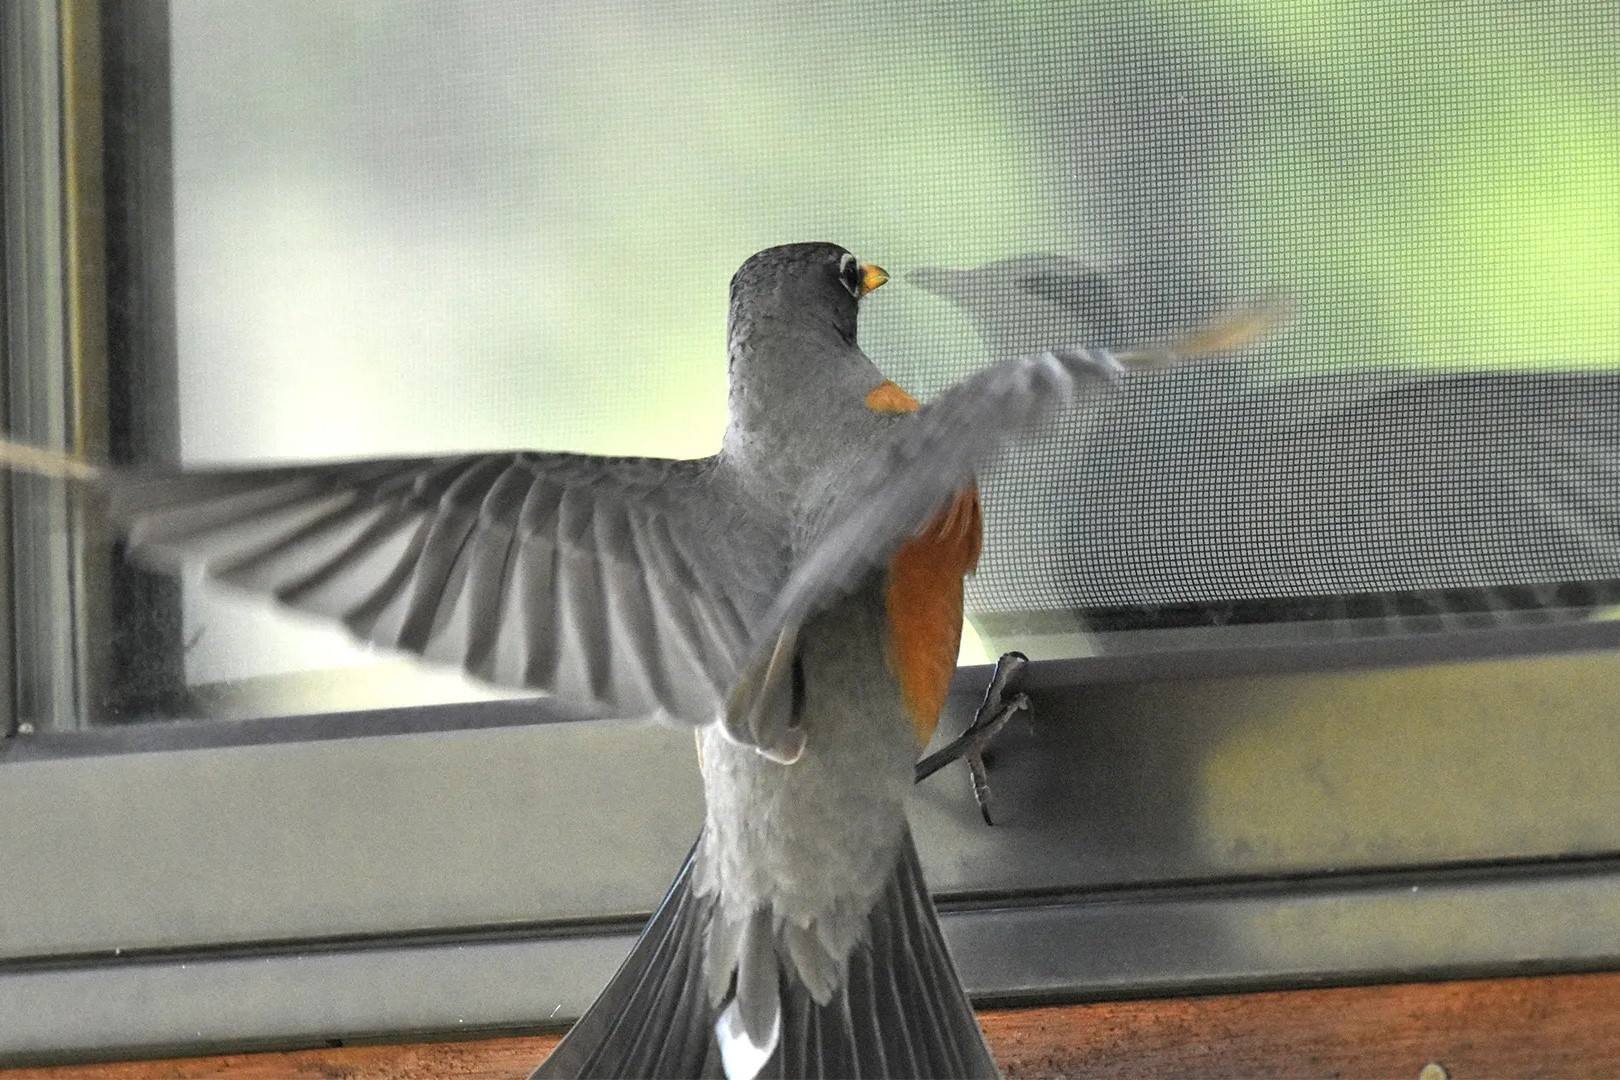 The Mysterious Significance Of A Bird’s Persistent Window Assault